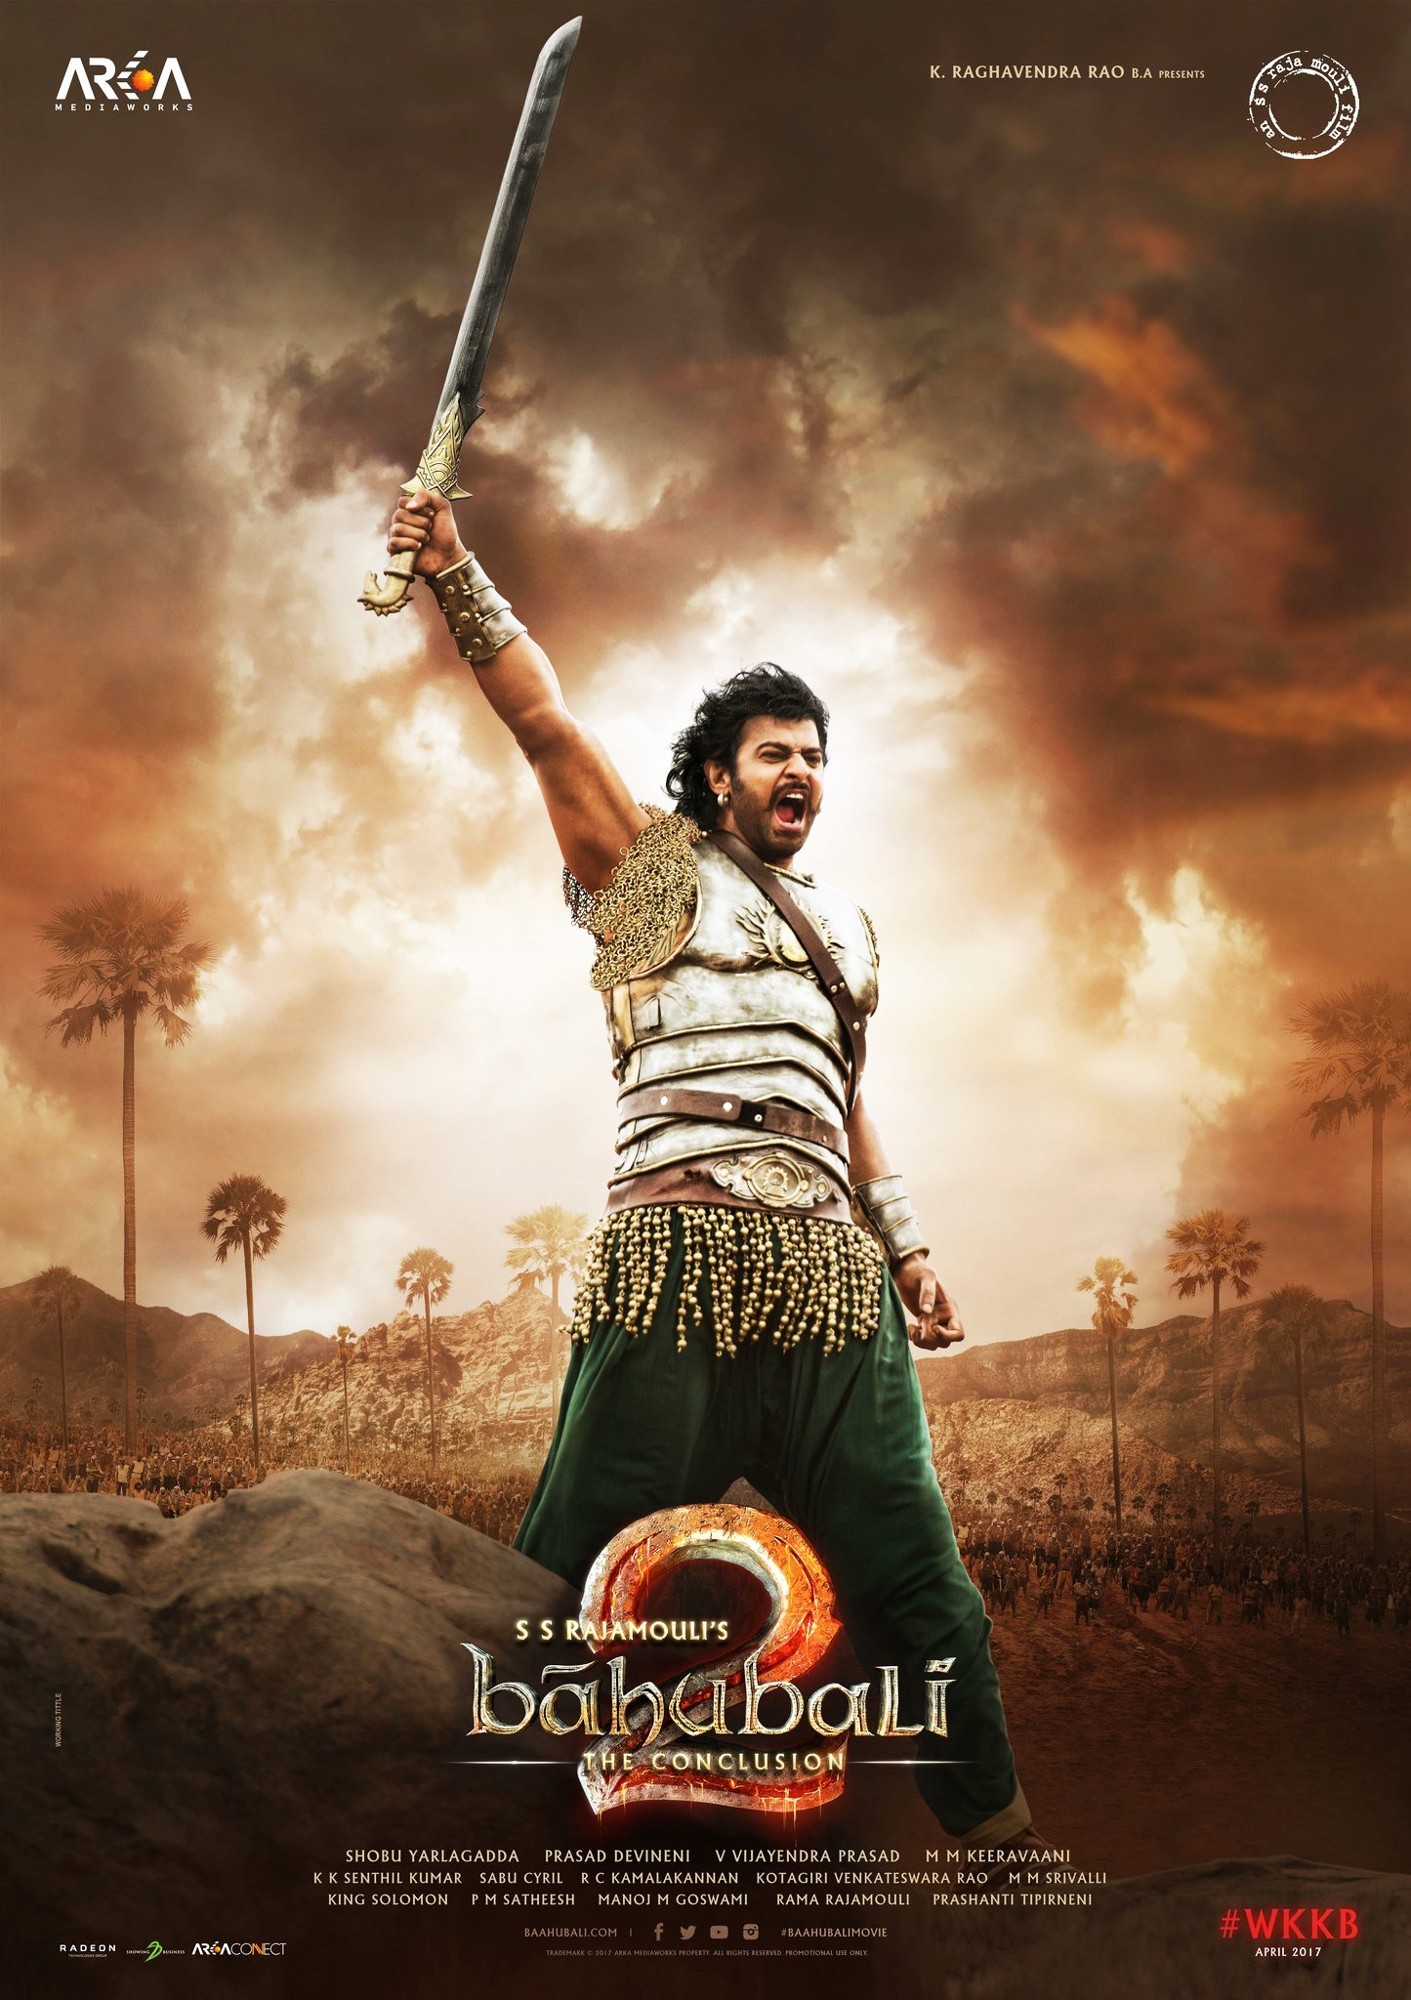 Poster of Arka Mediaworks' Baahubali 2: The Conclusion (2017)